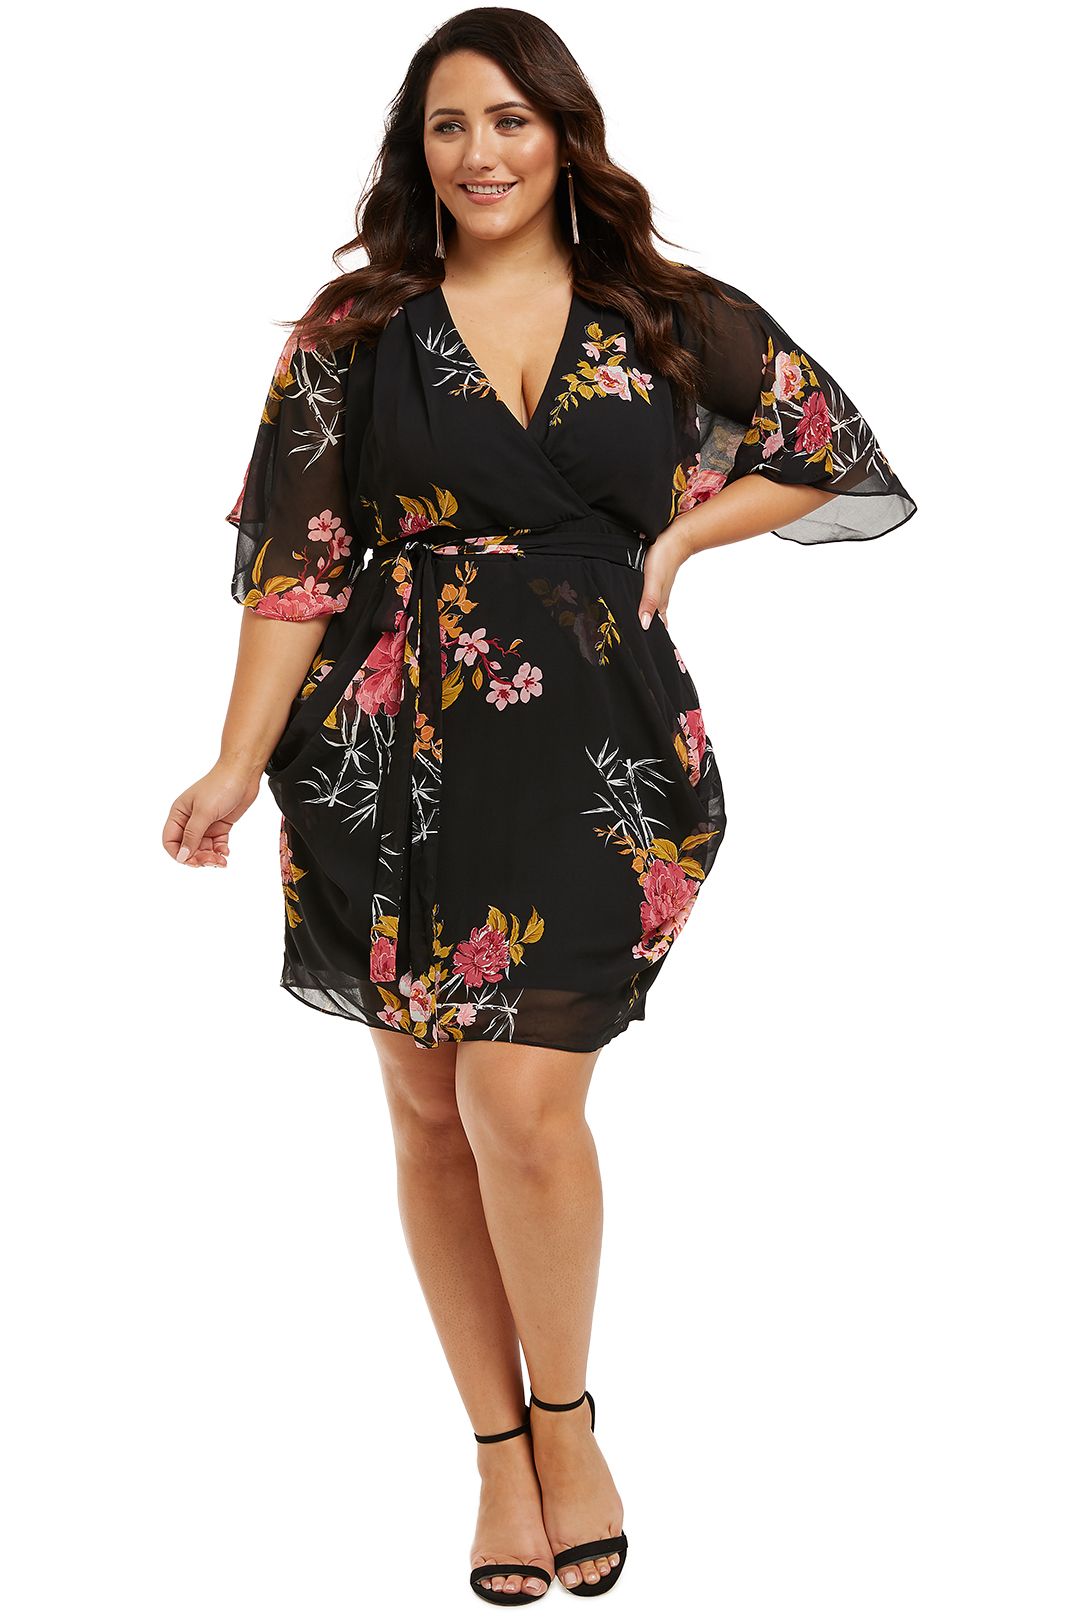 Beloved Wrap Dress in Black by City Chic for Hire | GlamCorner